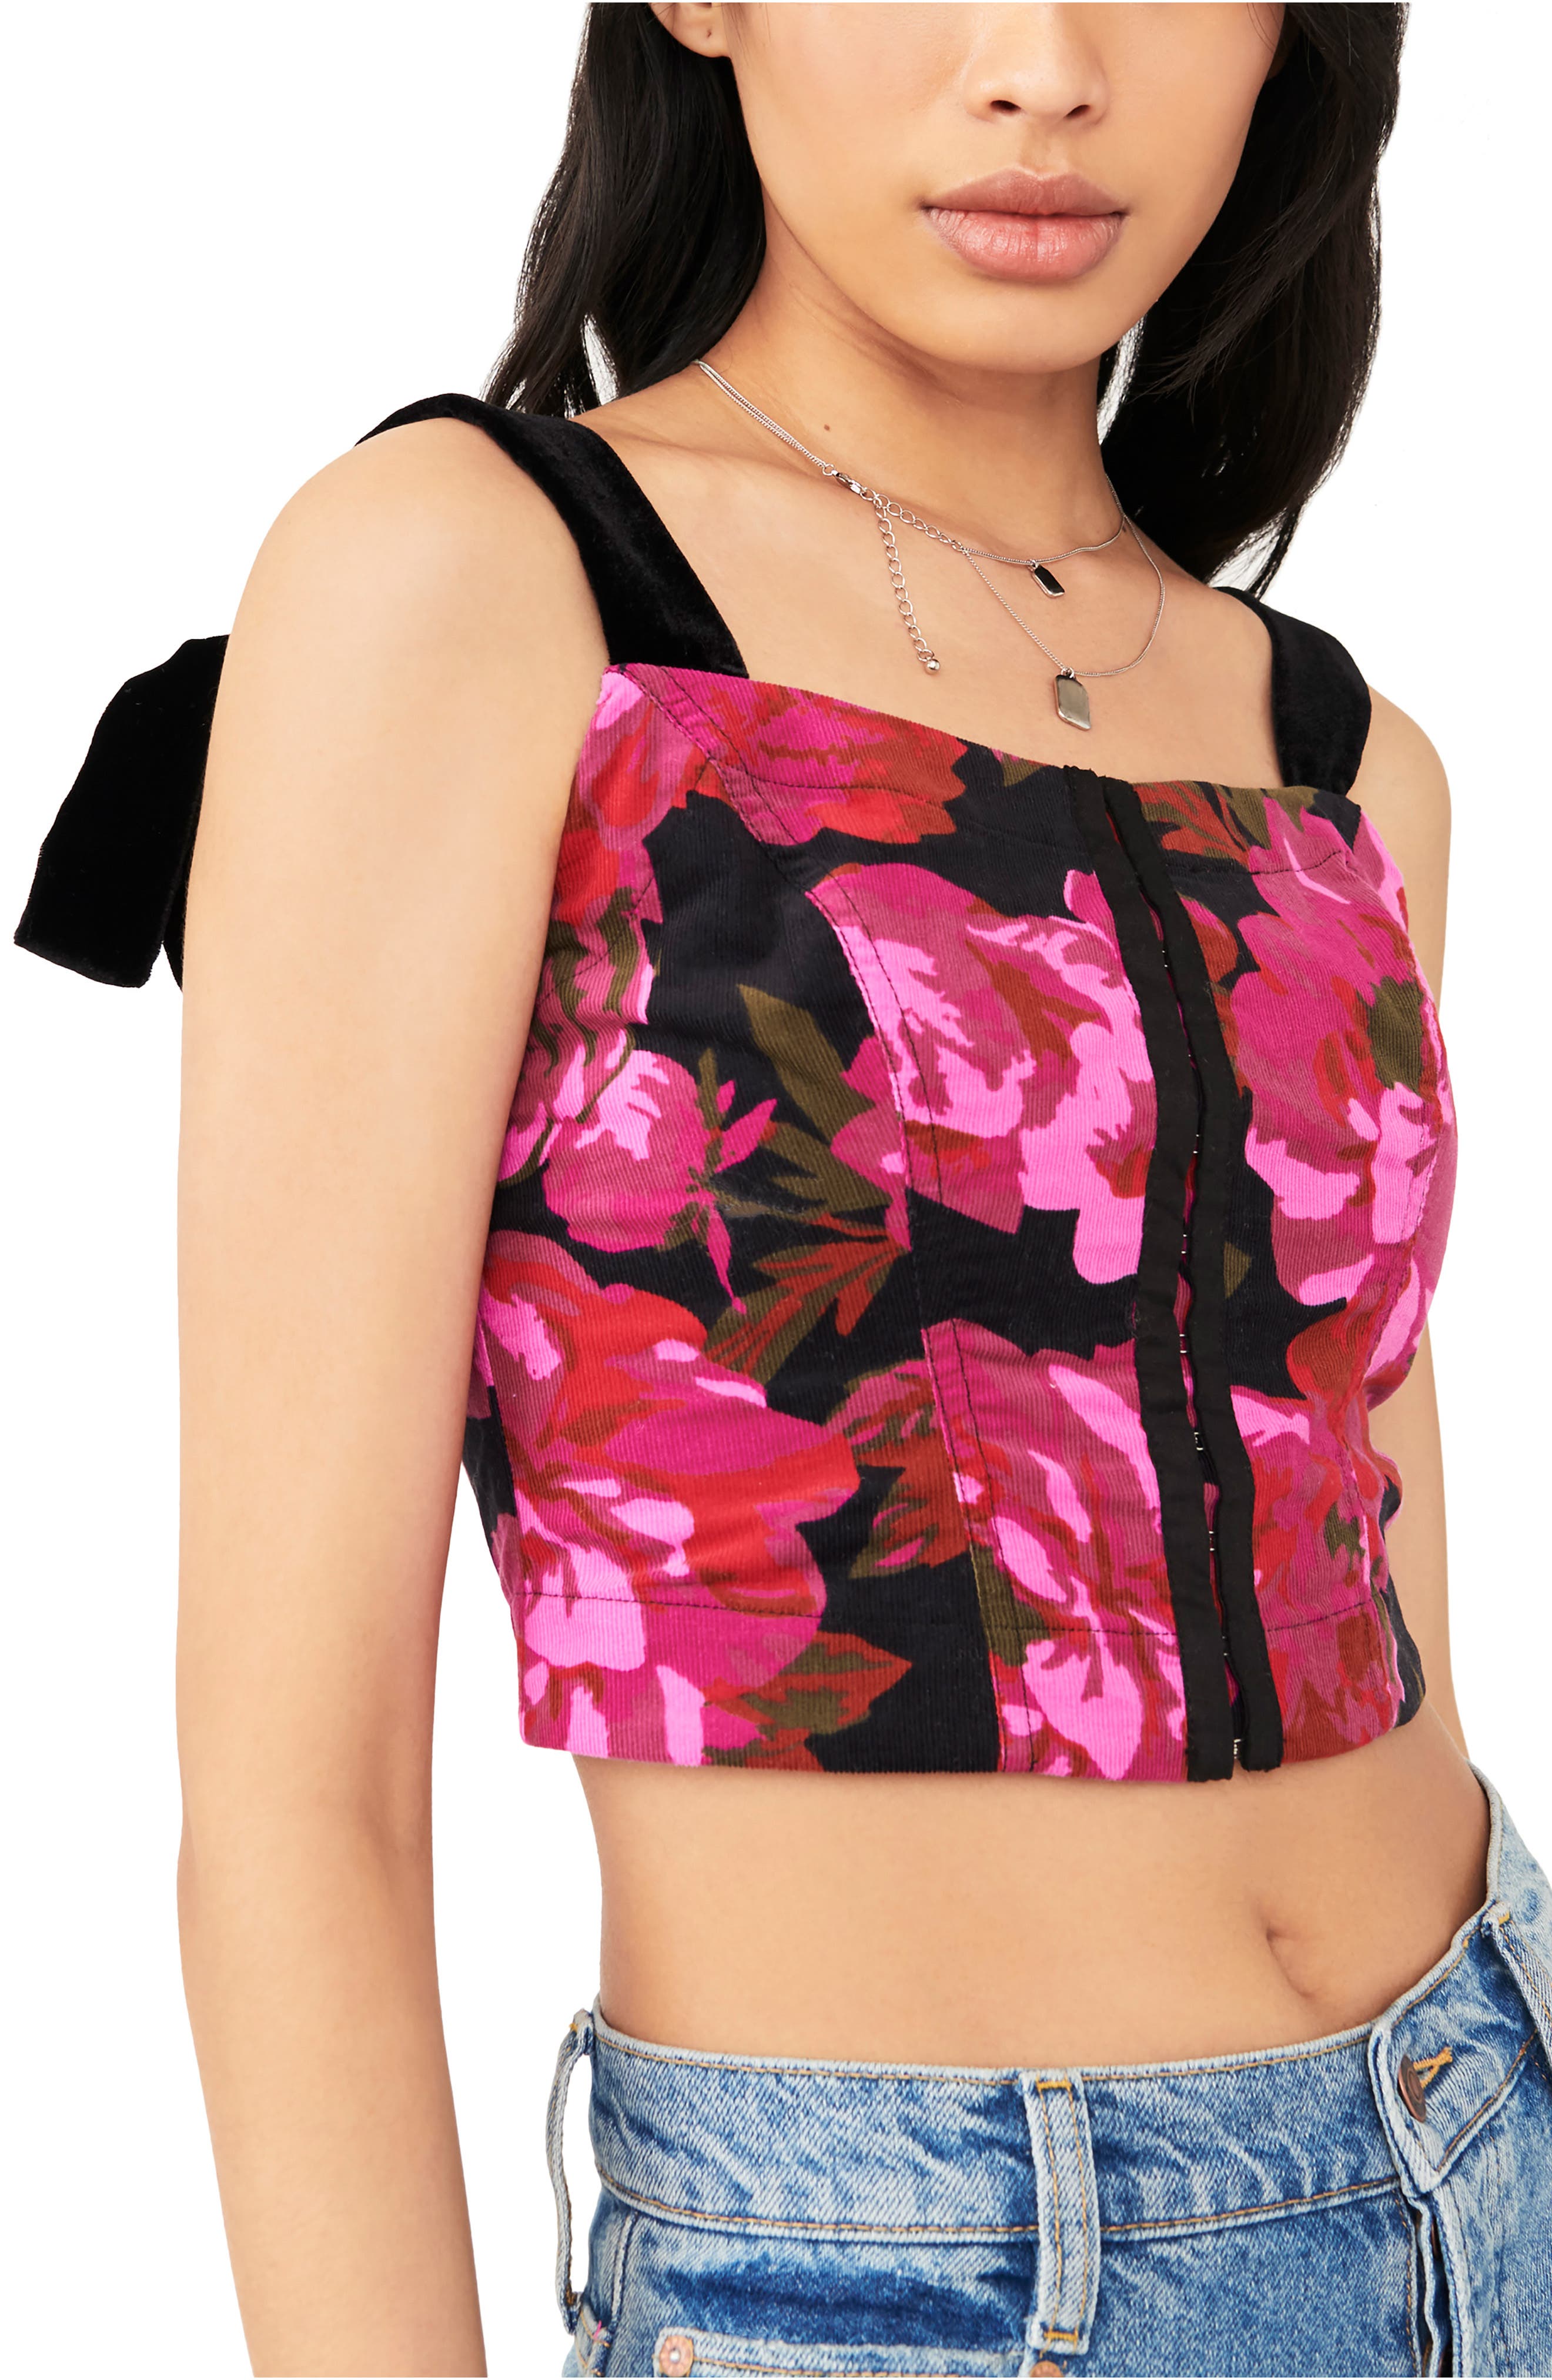 Black corset top with floral print